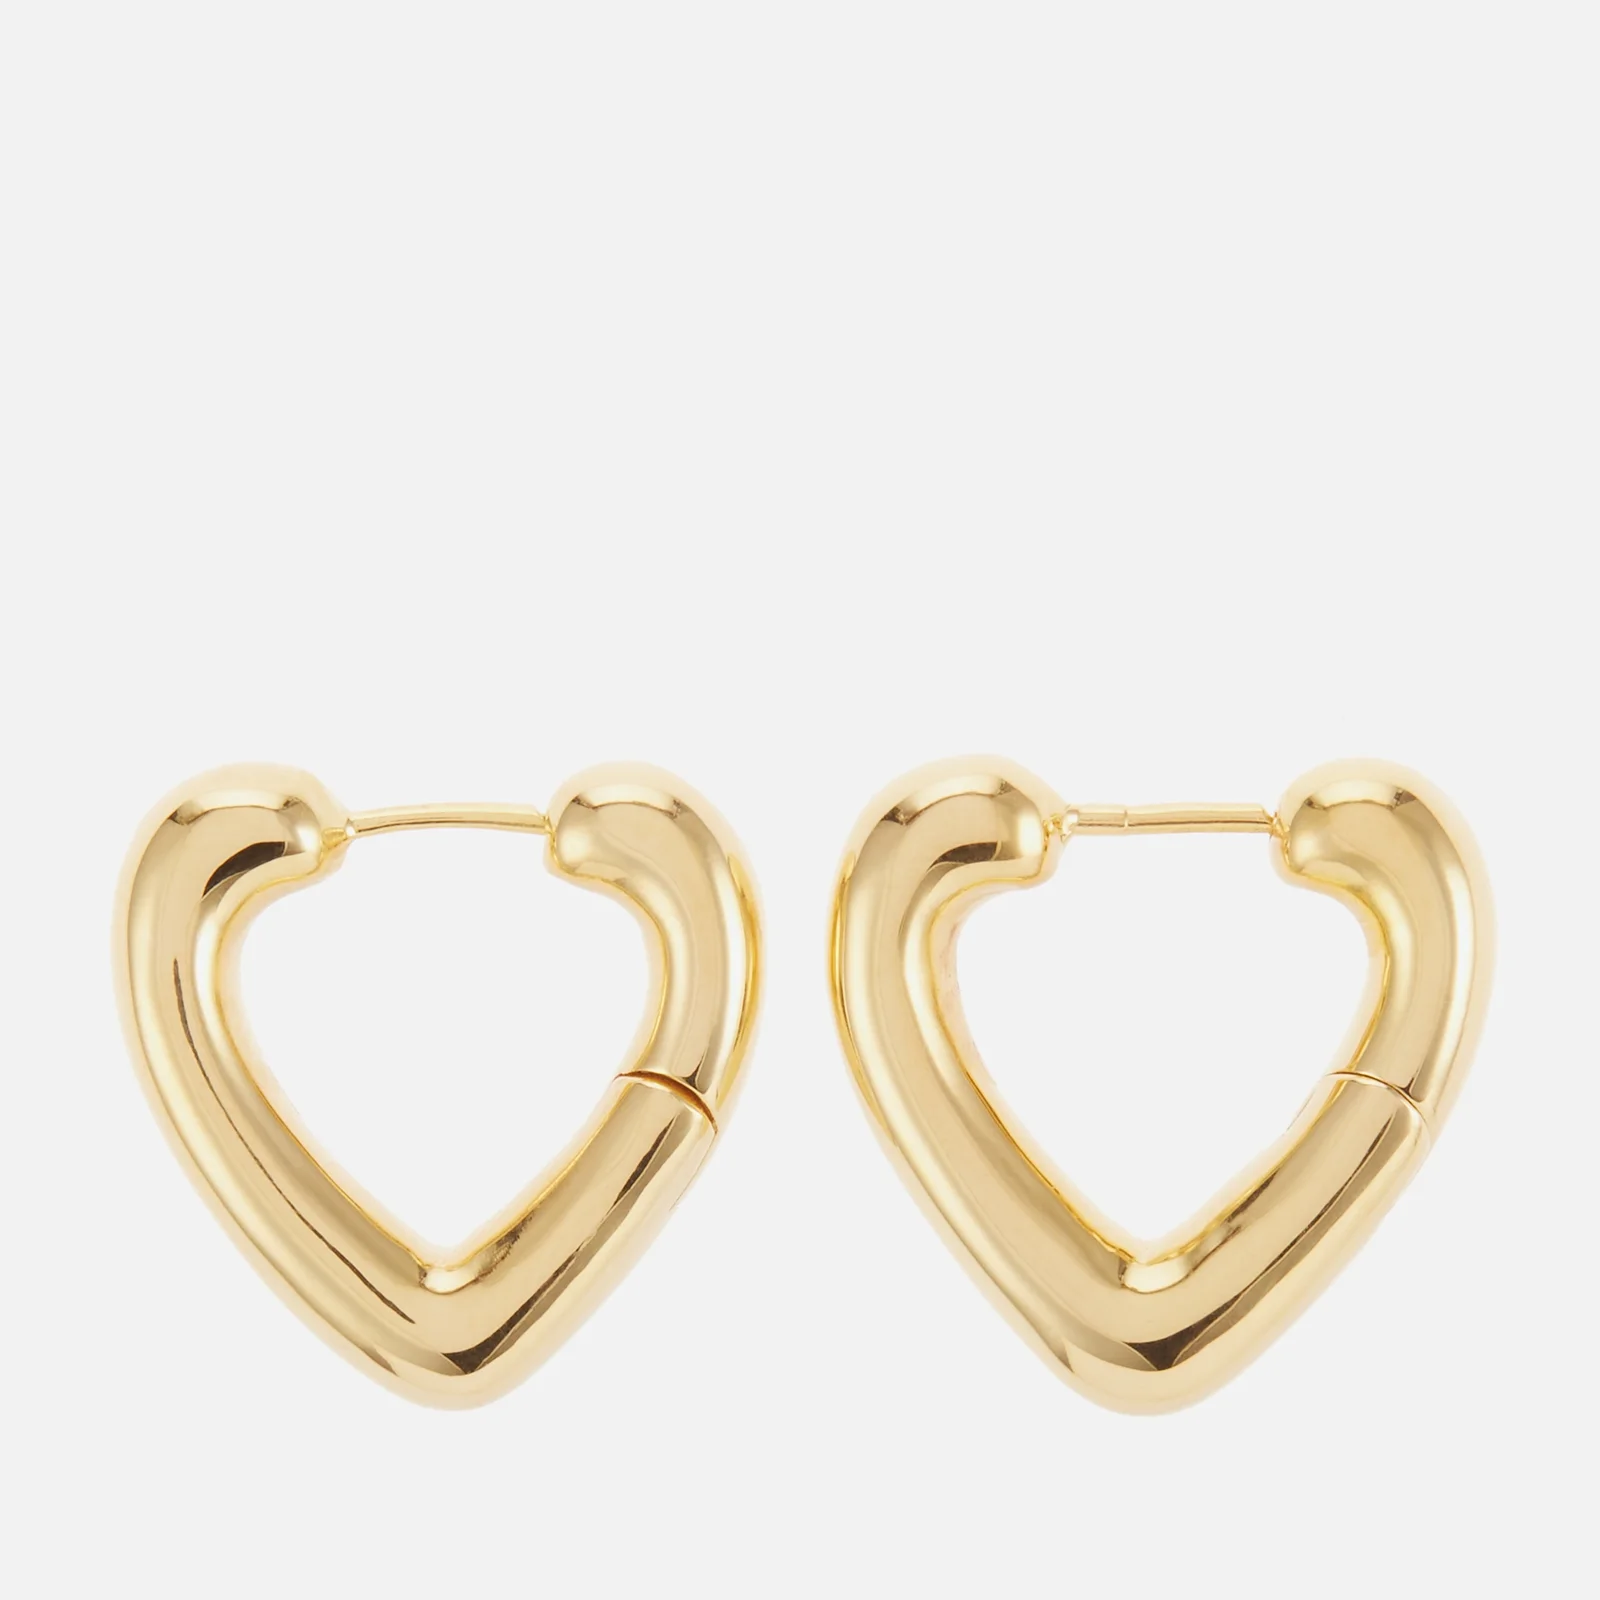 Astrid & Miyu Heart 18K Gold-Plated Sterling Silver Hoops Image 1